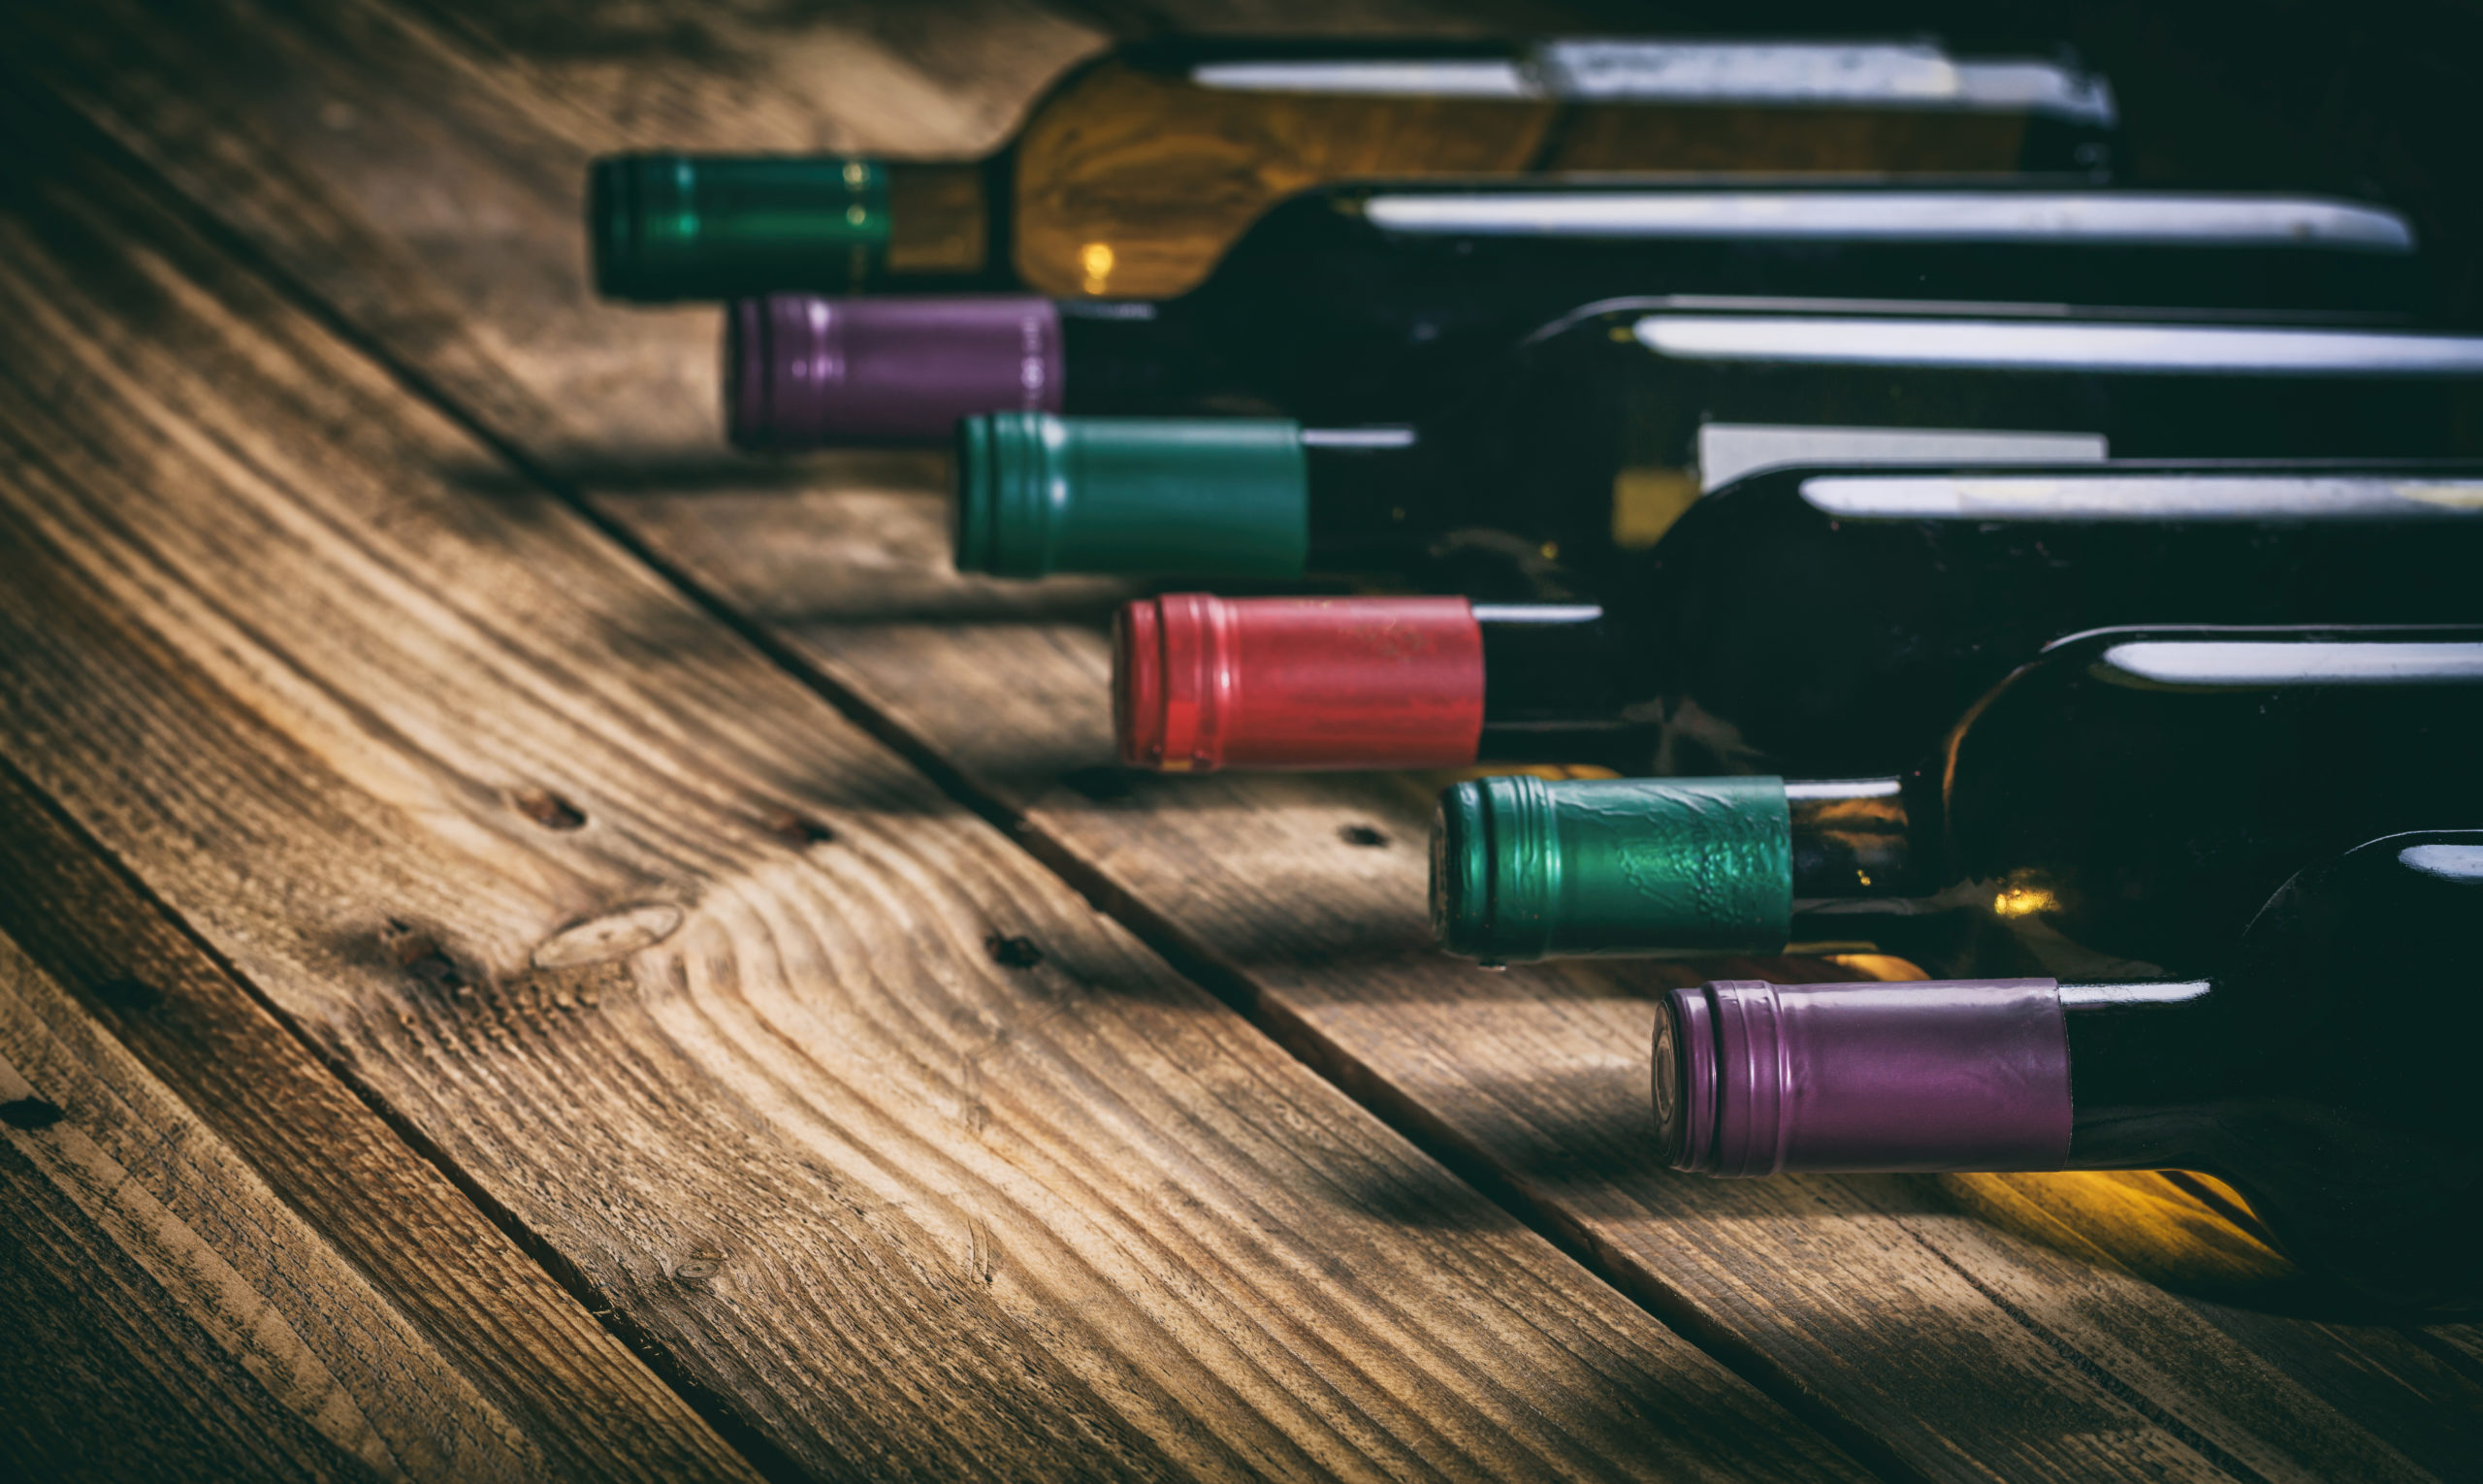 Wine bottles collection on a wooden table, dark background, copy space